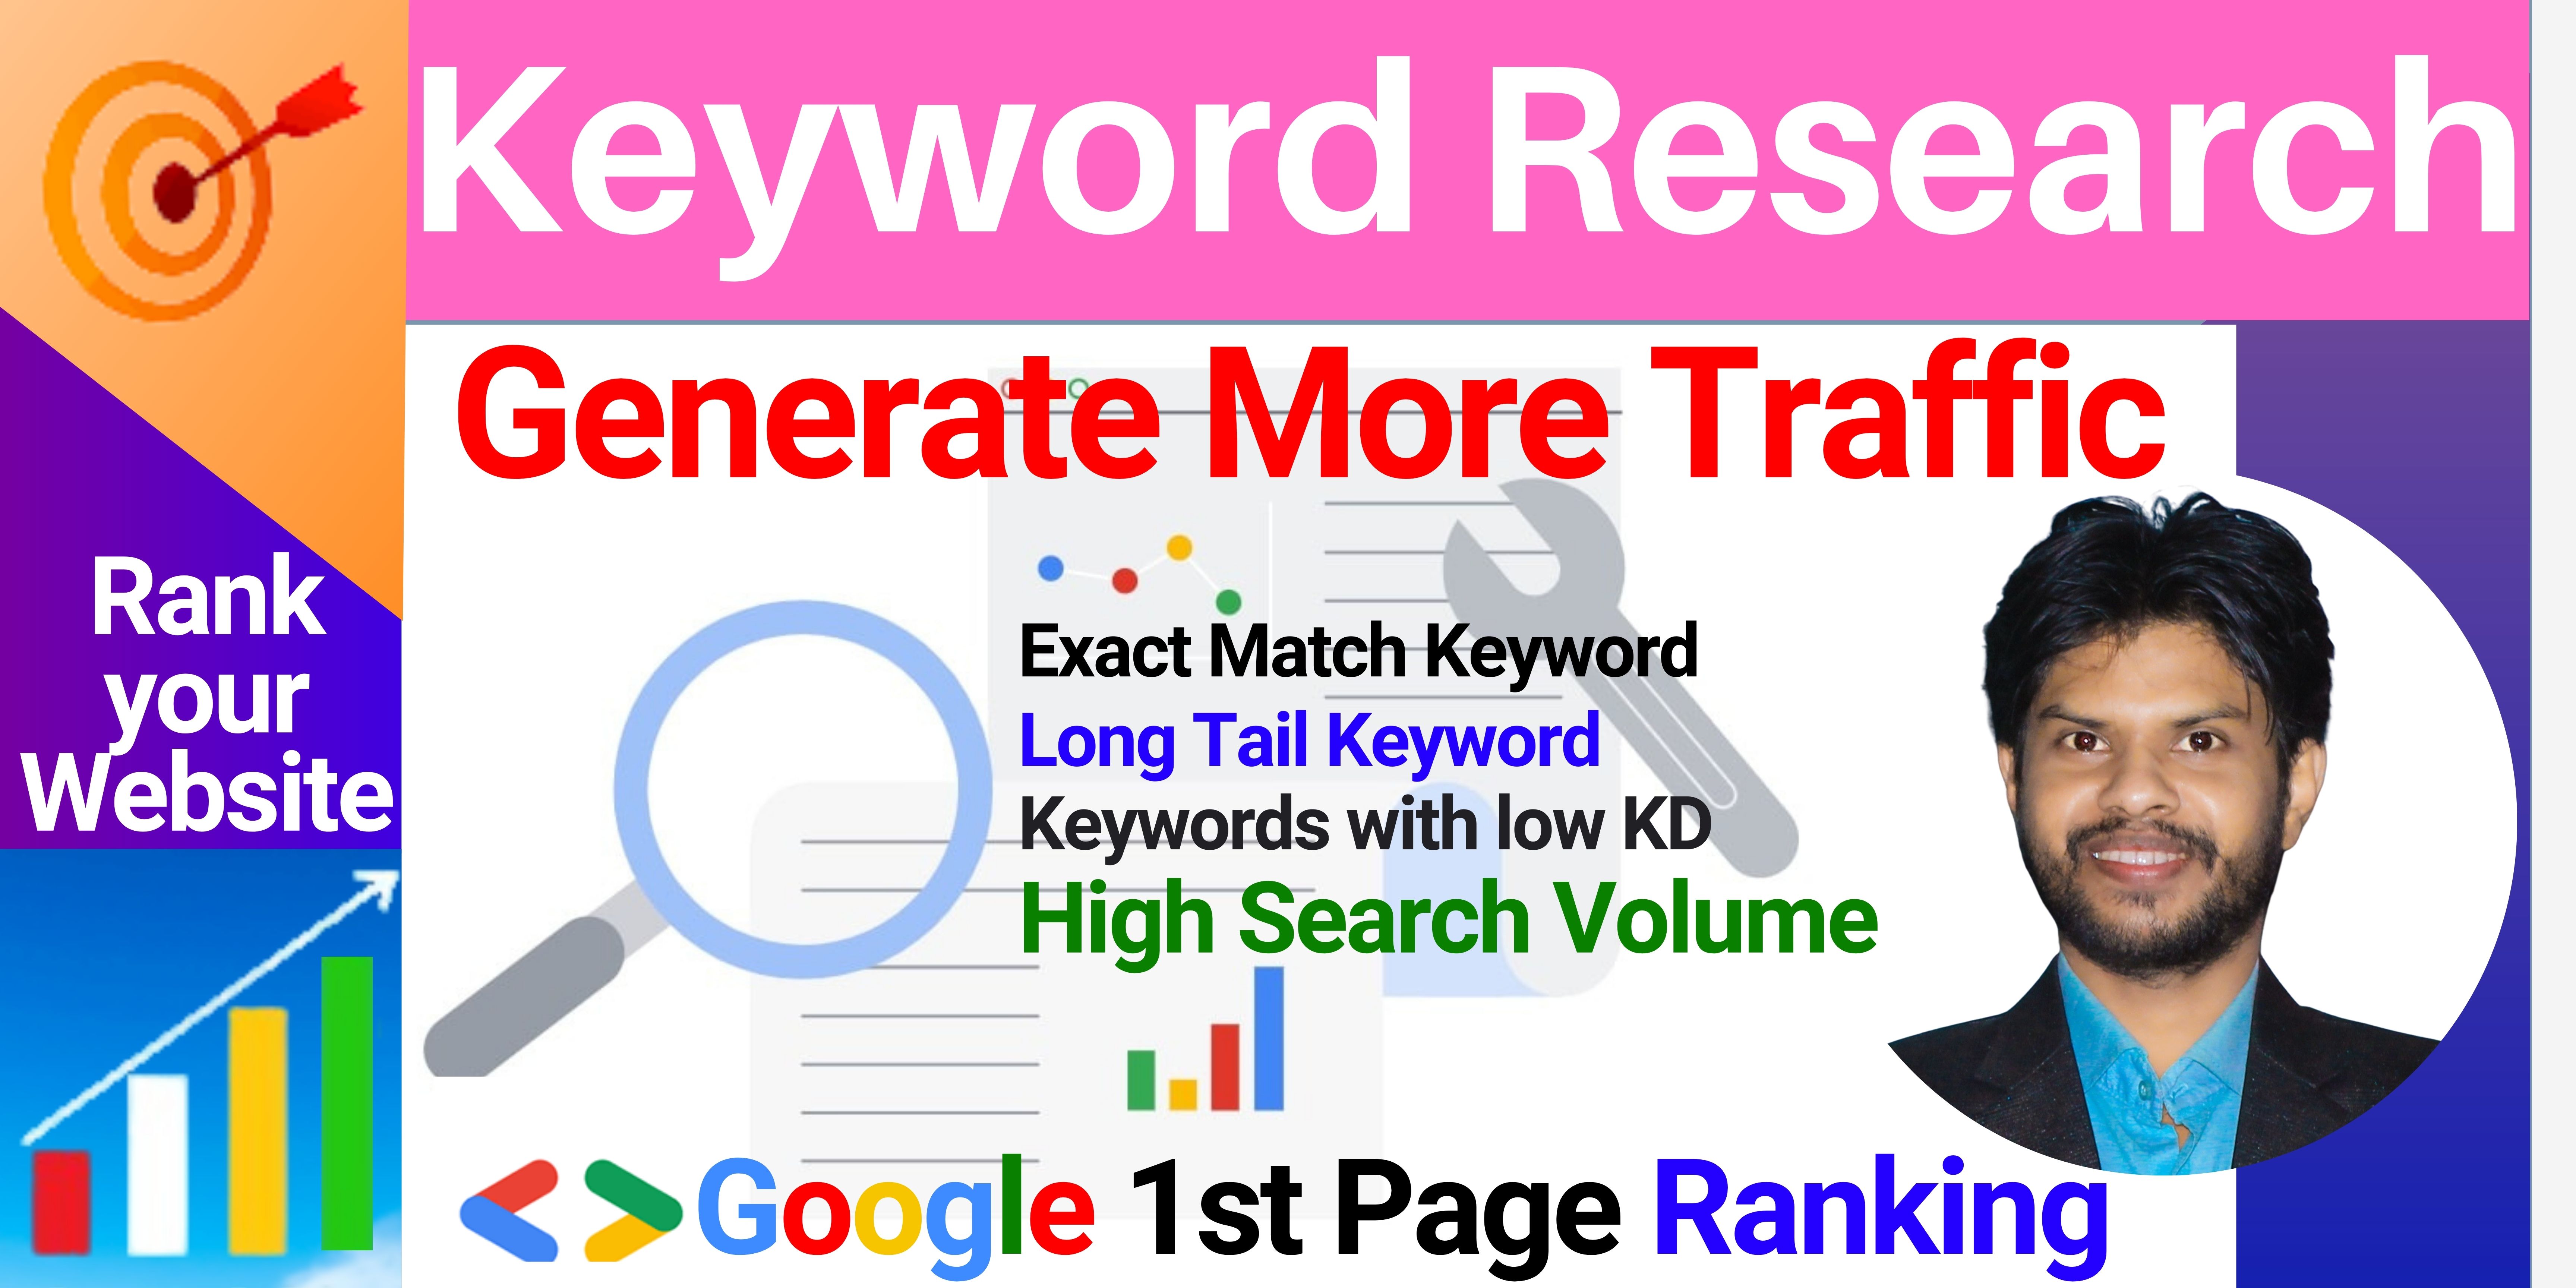 Keyword Research I will find 10 Long Tail Keyword to Generate more Traffic for your website